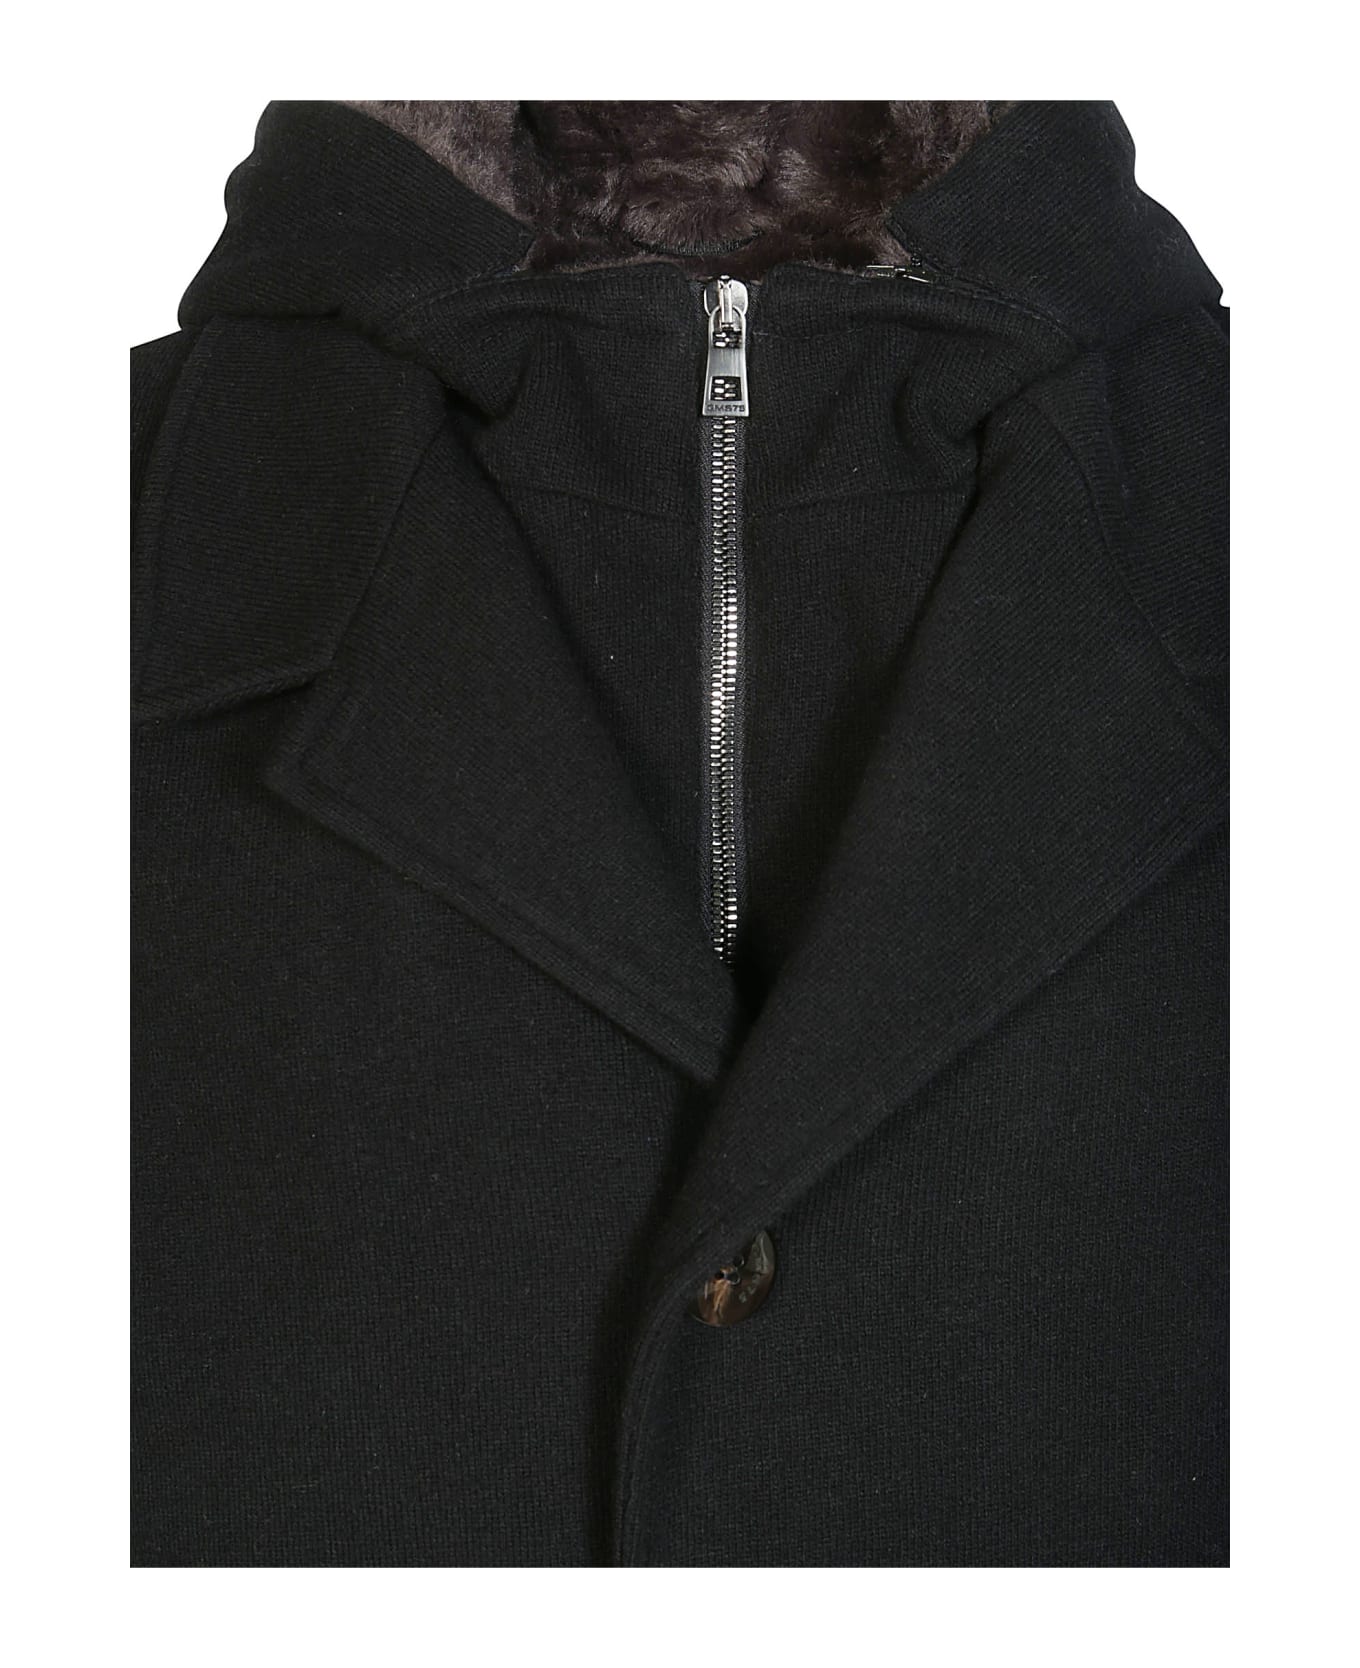 Gimo's Capp Davan Stacca Fur Coat With Applied Pocket Wool - BLACK